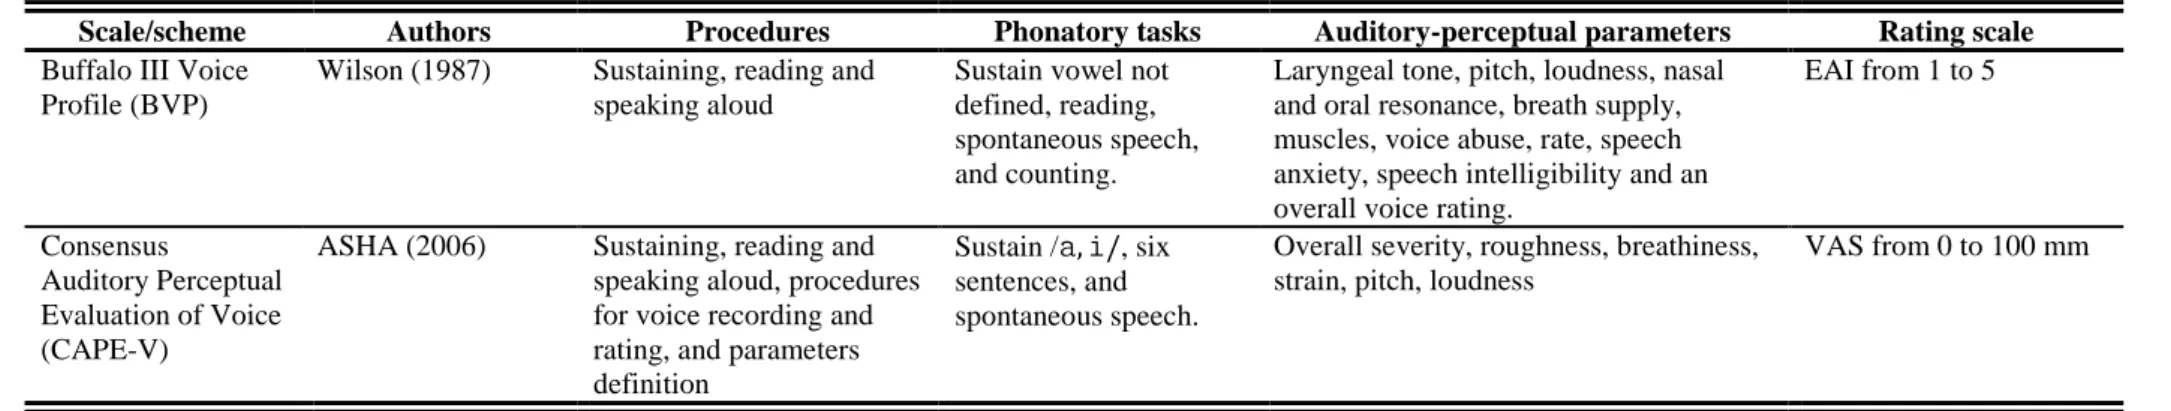 Table 1 (Cont.)  –  Scales and schemes for auditory-perceptual voice evaluations. 